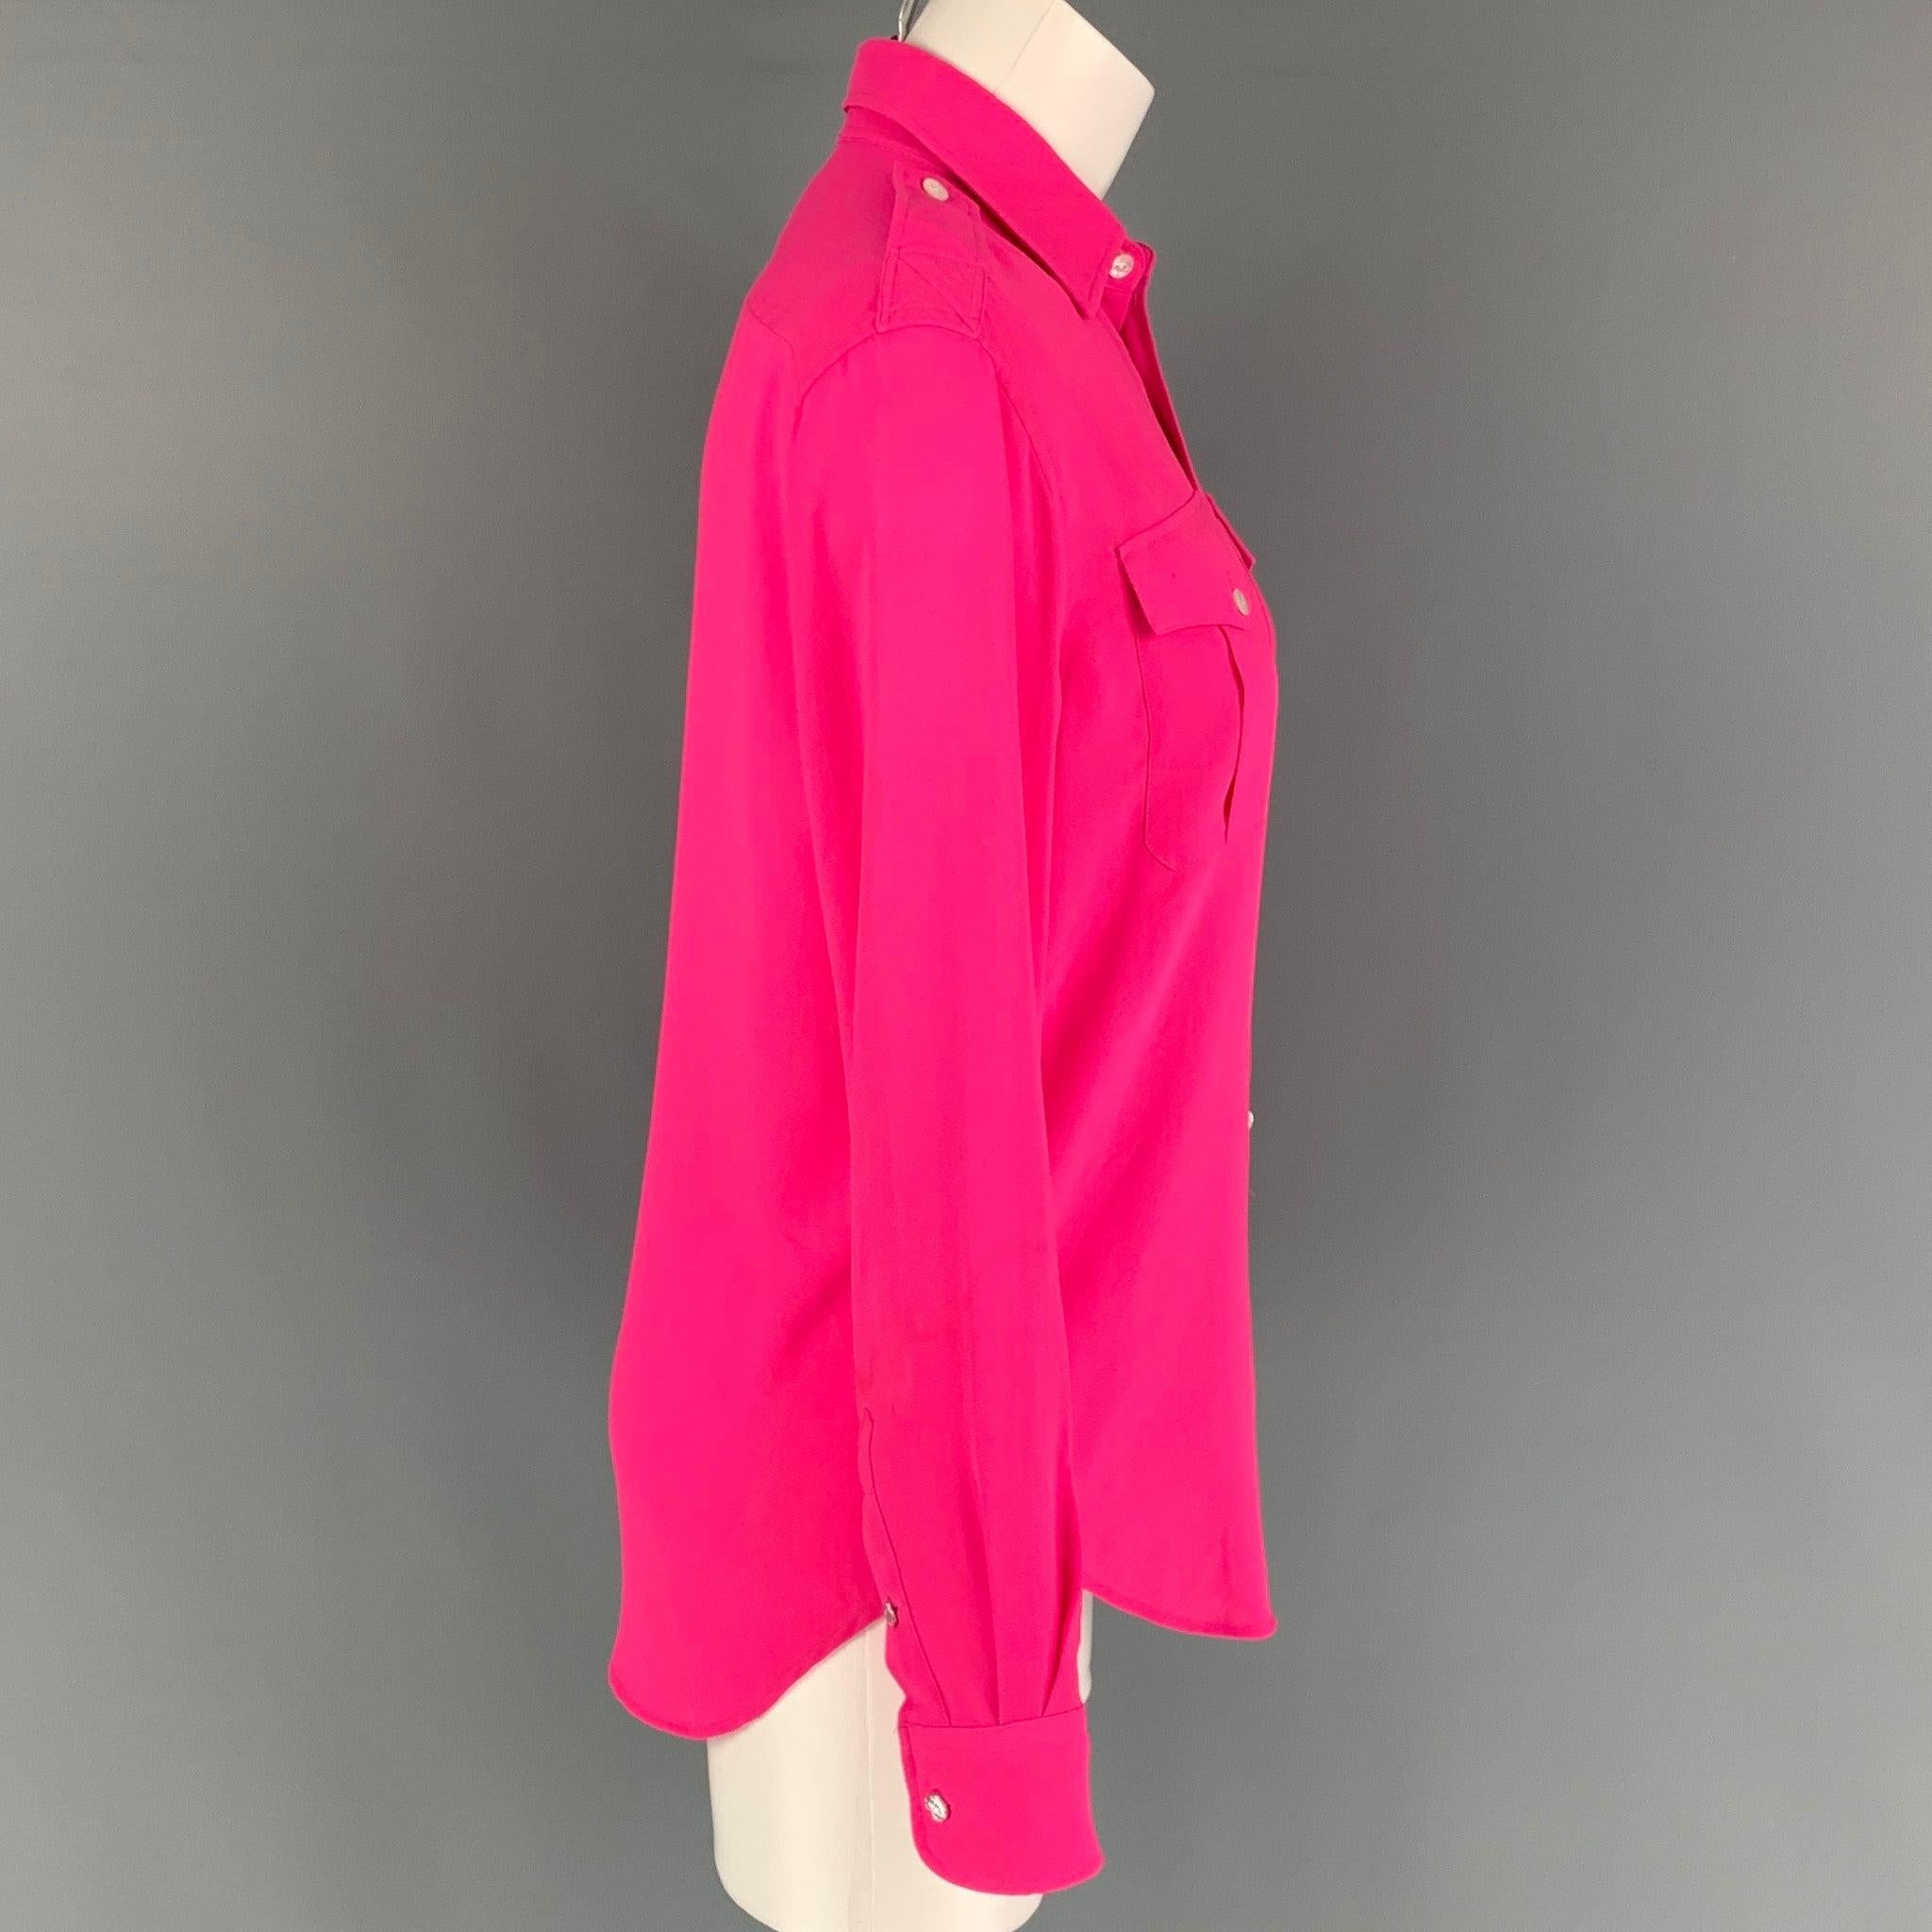 RALPH LAUREN 'Black Label' shirt comes in a pink polyester featuring a relaxed fit, epaulettes, patch pockets, spread collar, and a button up closure.
Very Good
Pre-Owned Condition. 

Marked:   2 

Measurements: 
 
Shoulder:
16 inches  Bust: 37